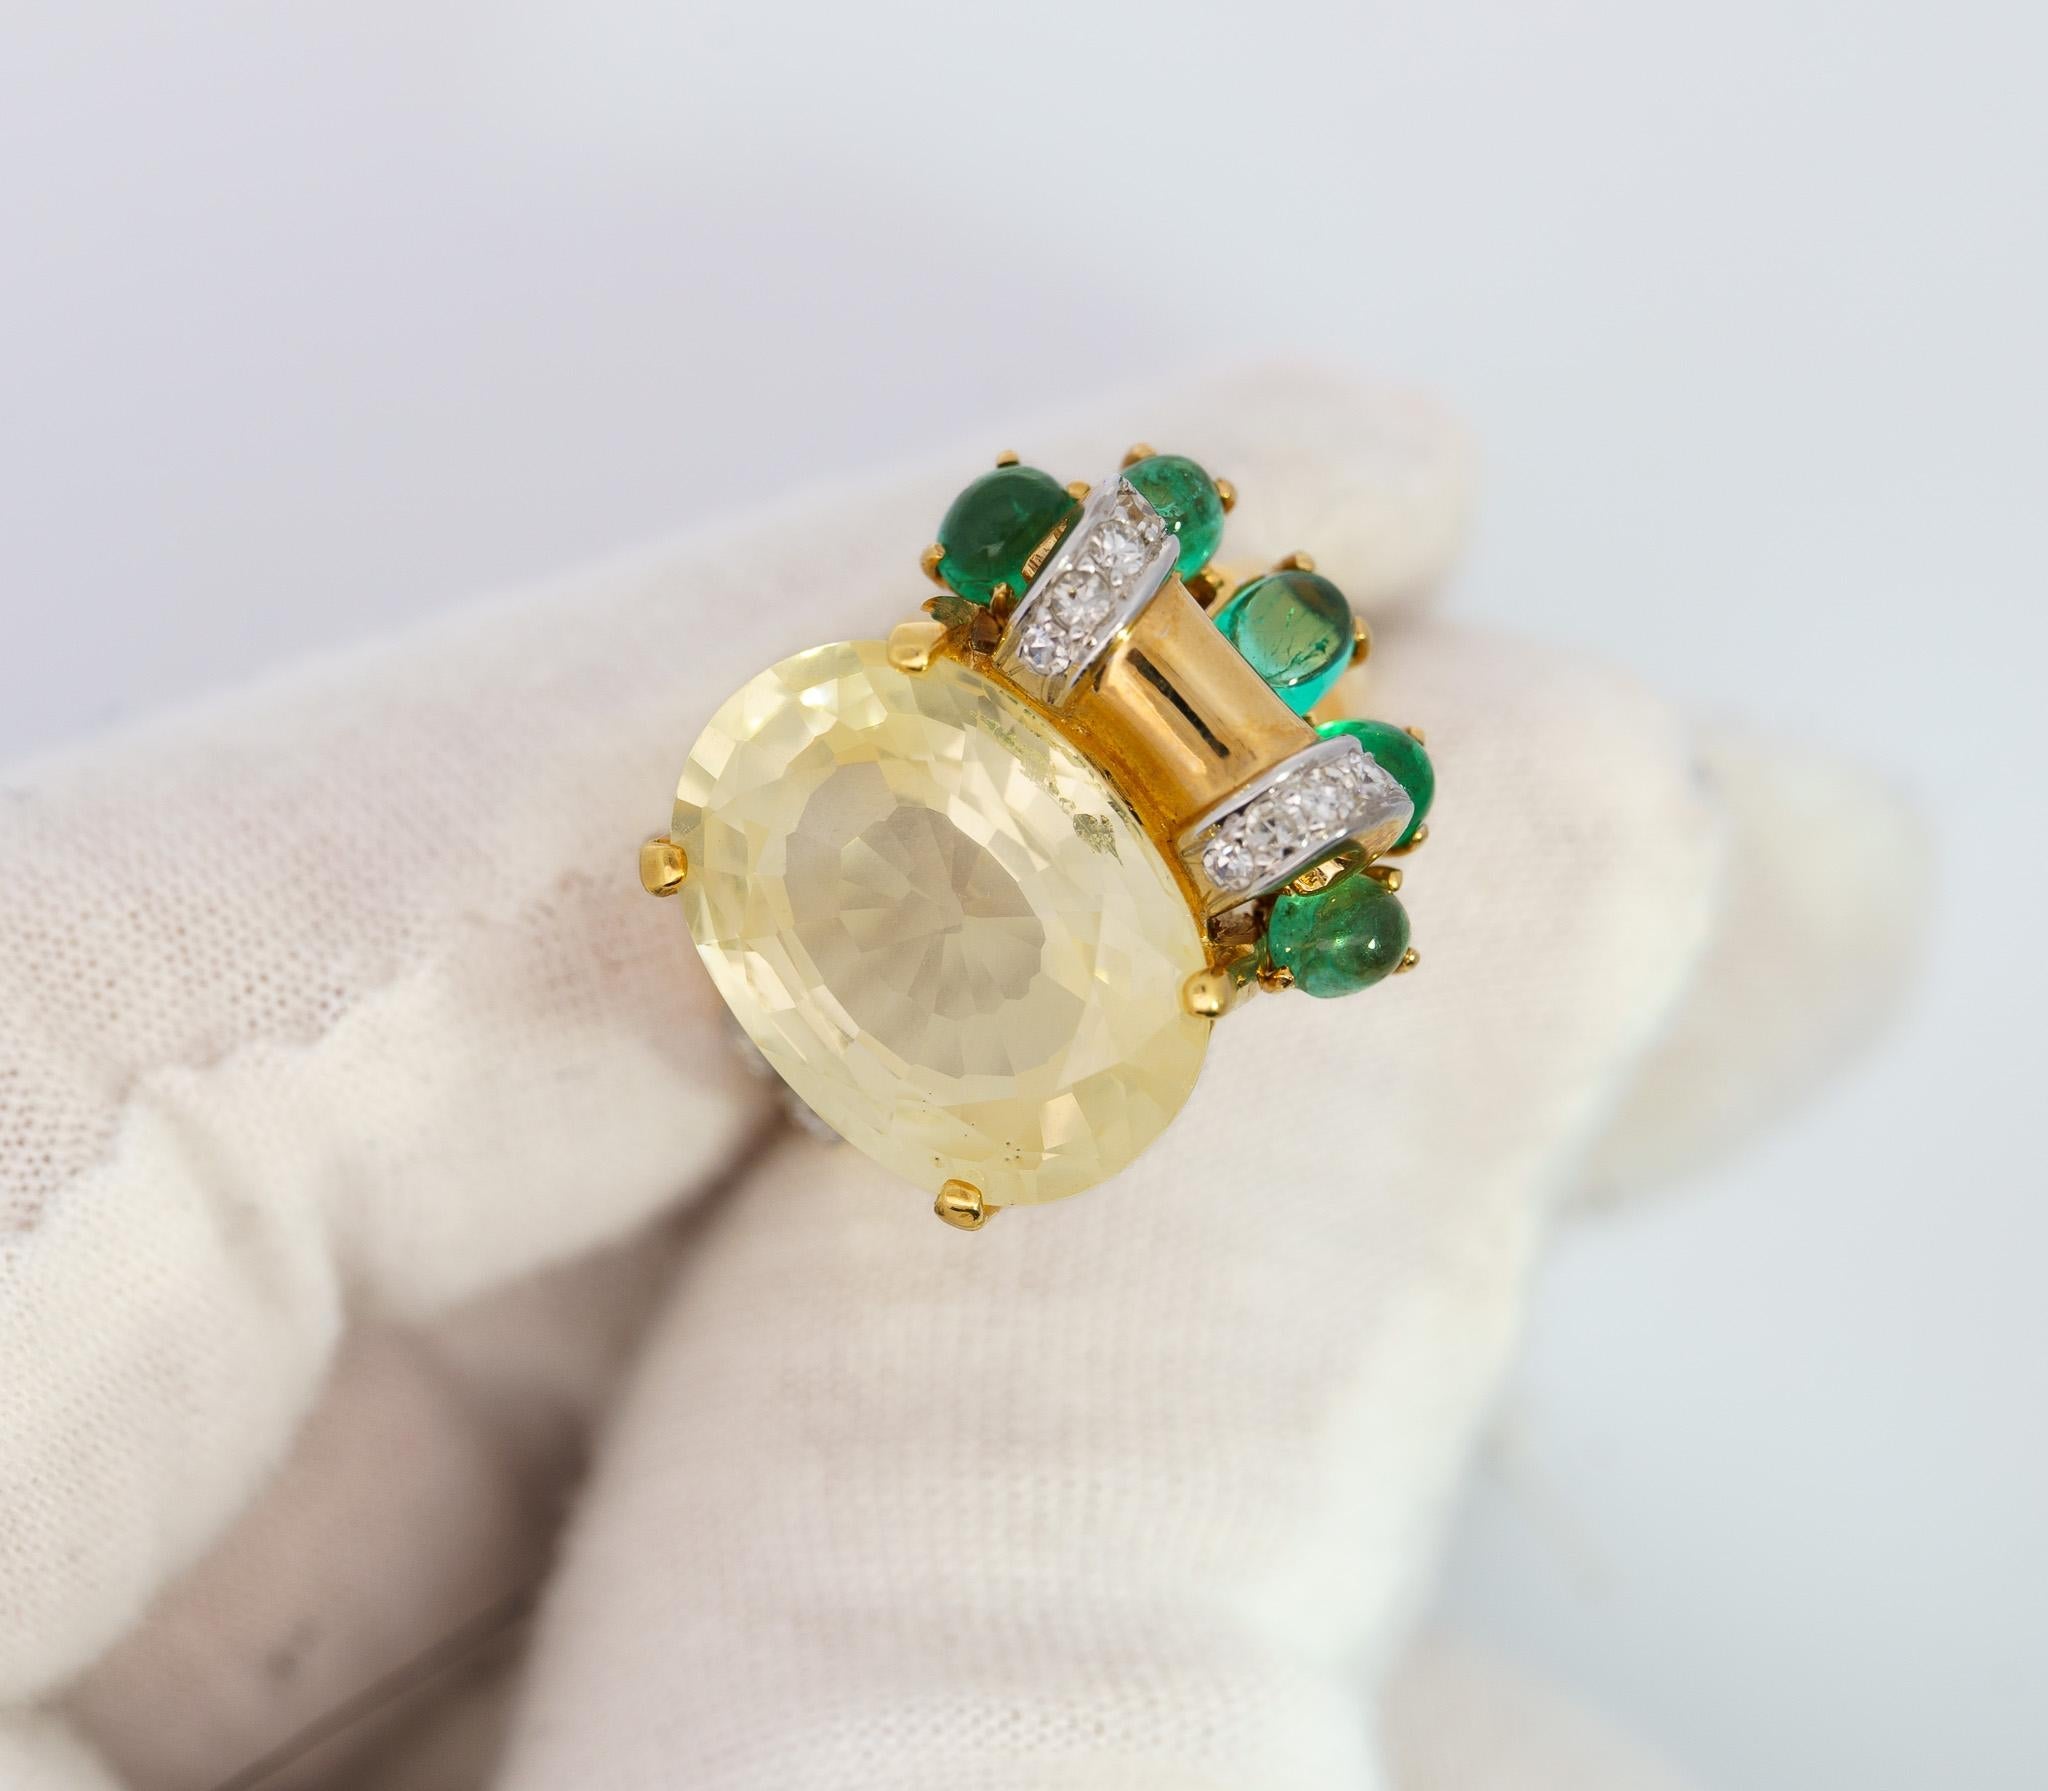 GRS Certified No Heat 12.61 Carat Oval Yellow Sapphire & Emerald Floral Ring